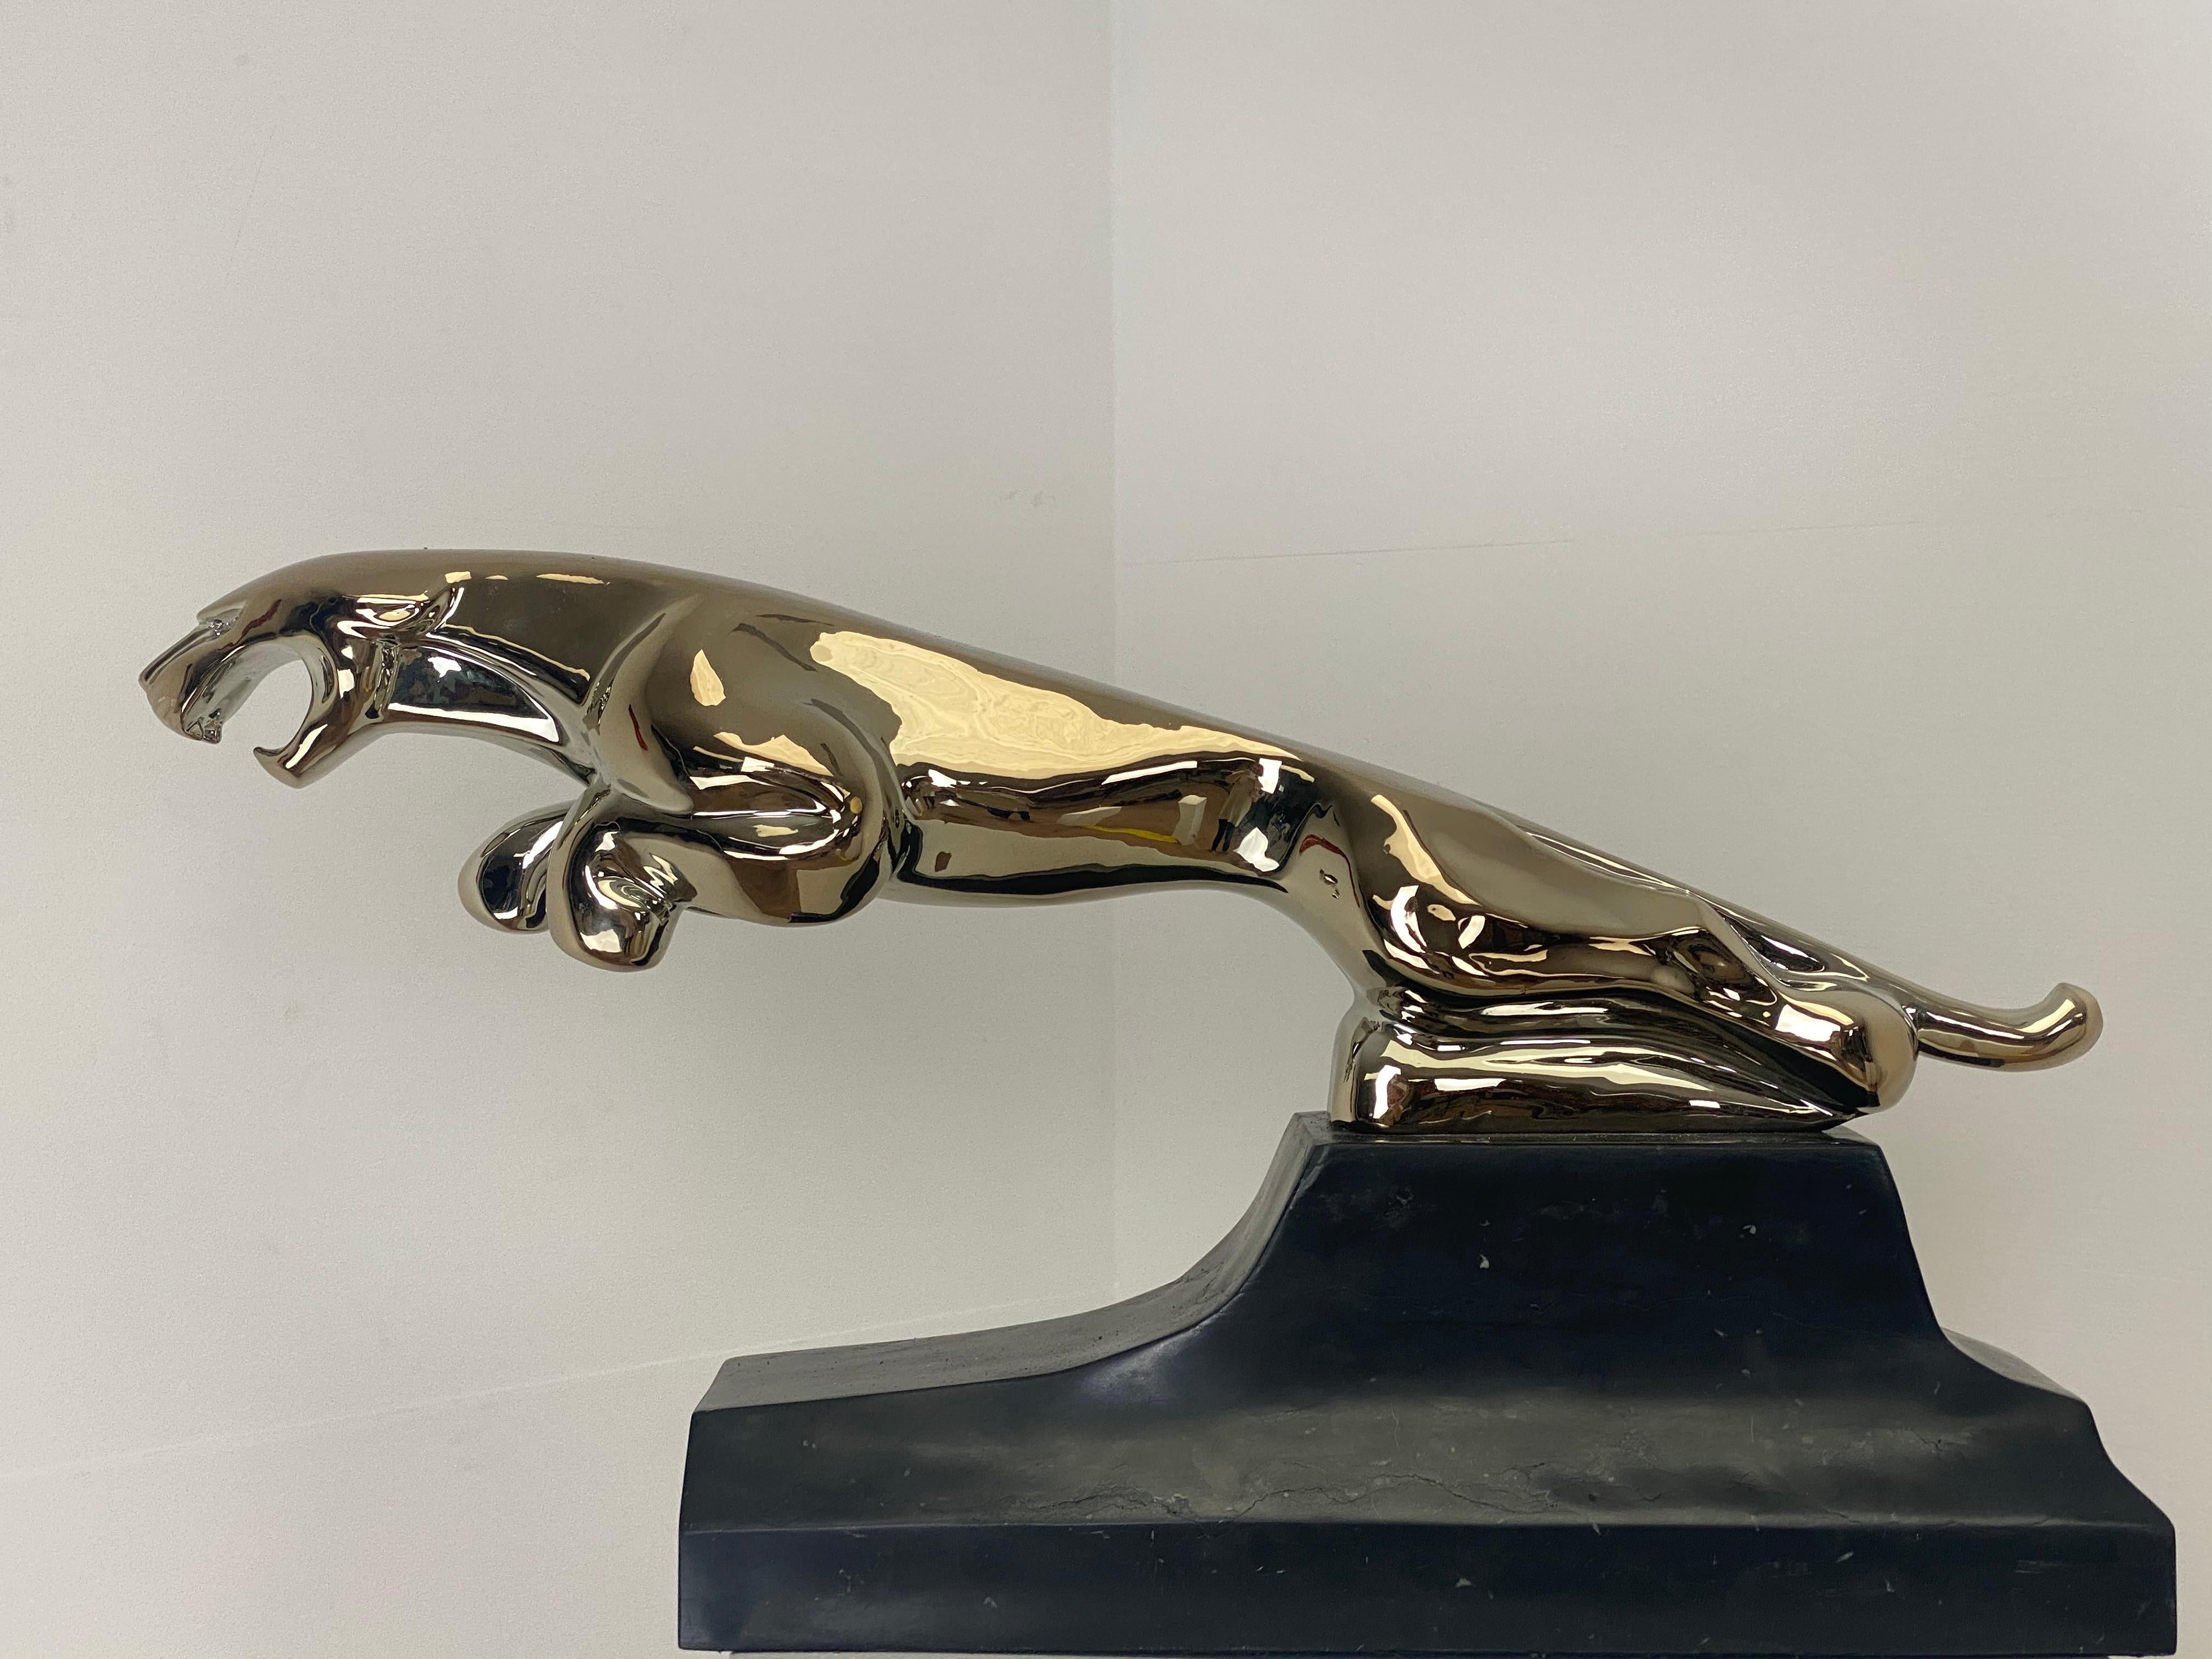 An XXL Vintage JAGUAR Car Emblem ,
exceptional object because of its size, beautiful patina and shine of the metal
and stone base,
the object comes from a Parisian based Jaguar Garage and was on the desk of the Garages Director,
a real Collectors